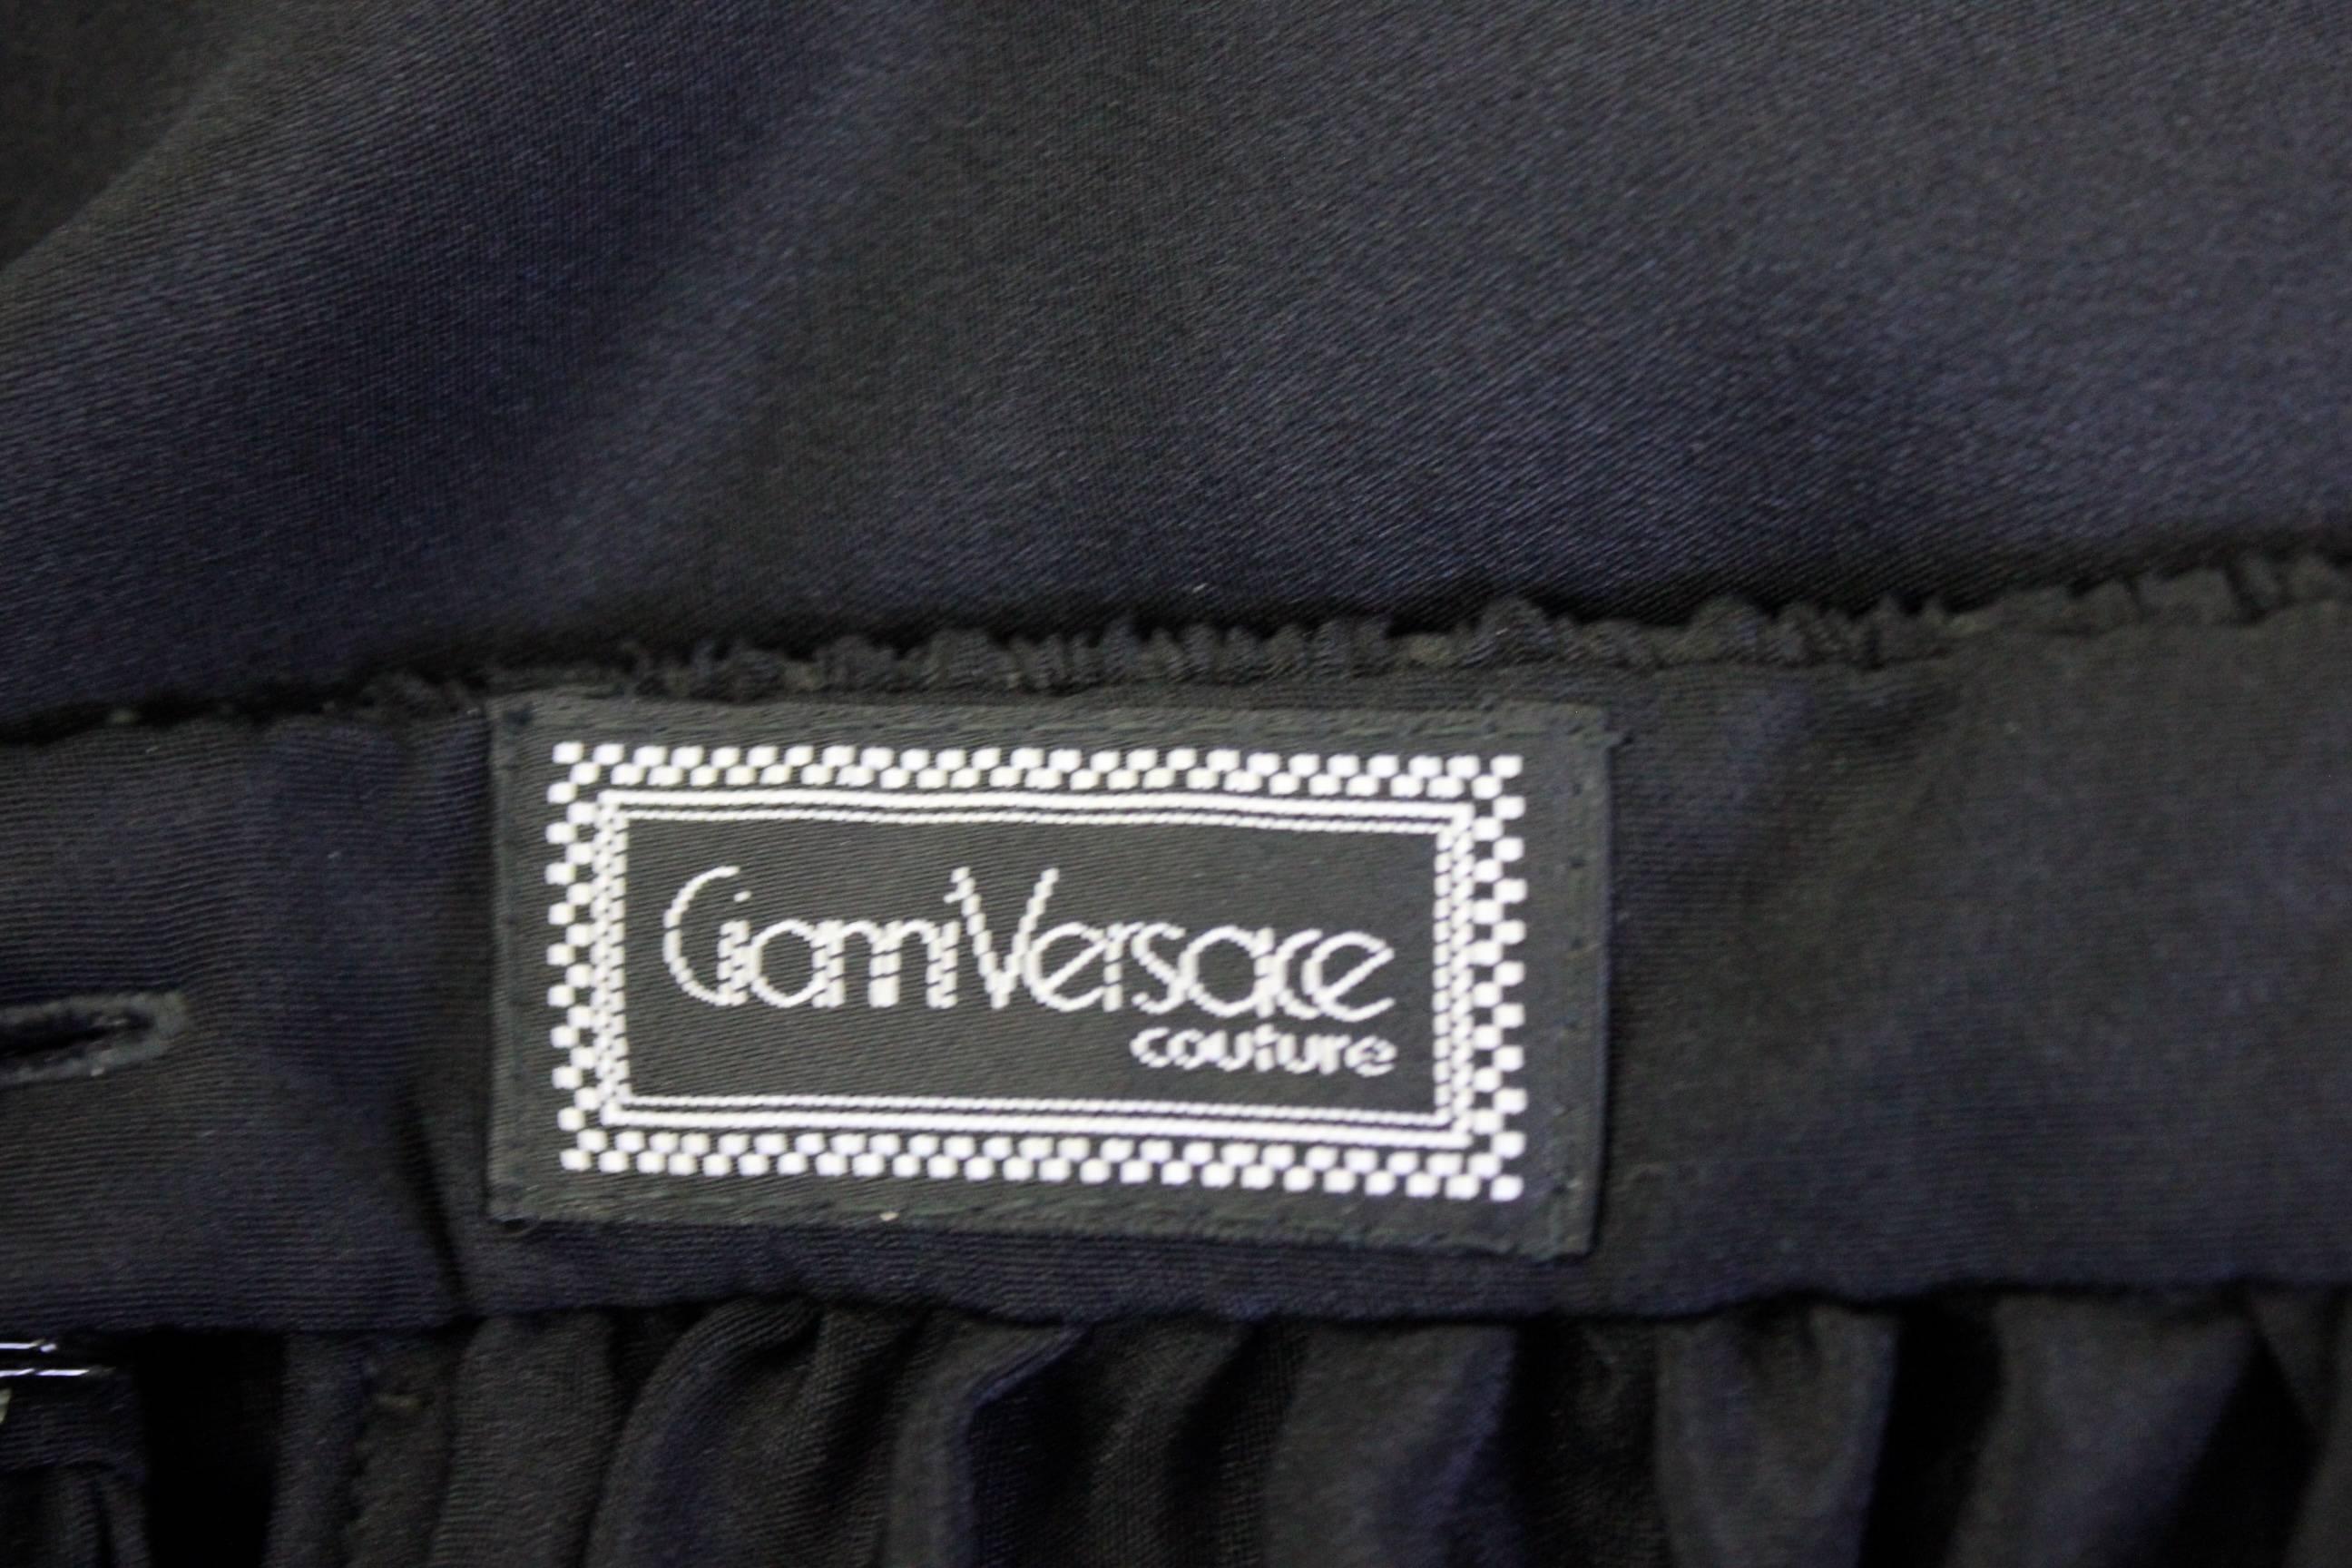 Rare Gianni Versace Couture Silk Dress Fall 1990 For Sale 2